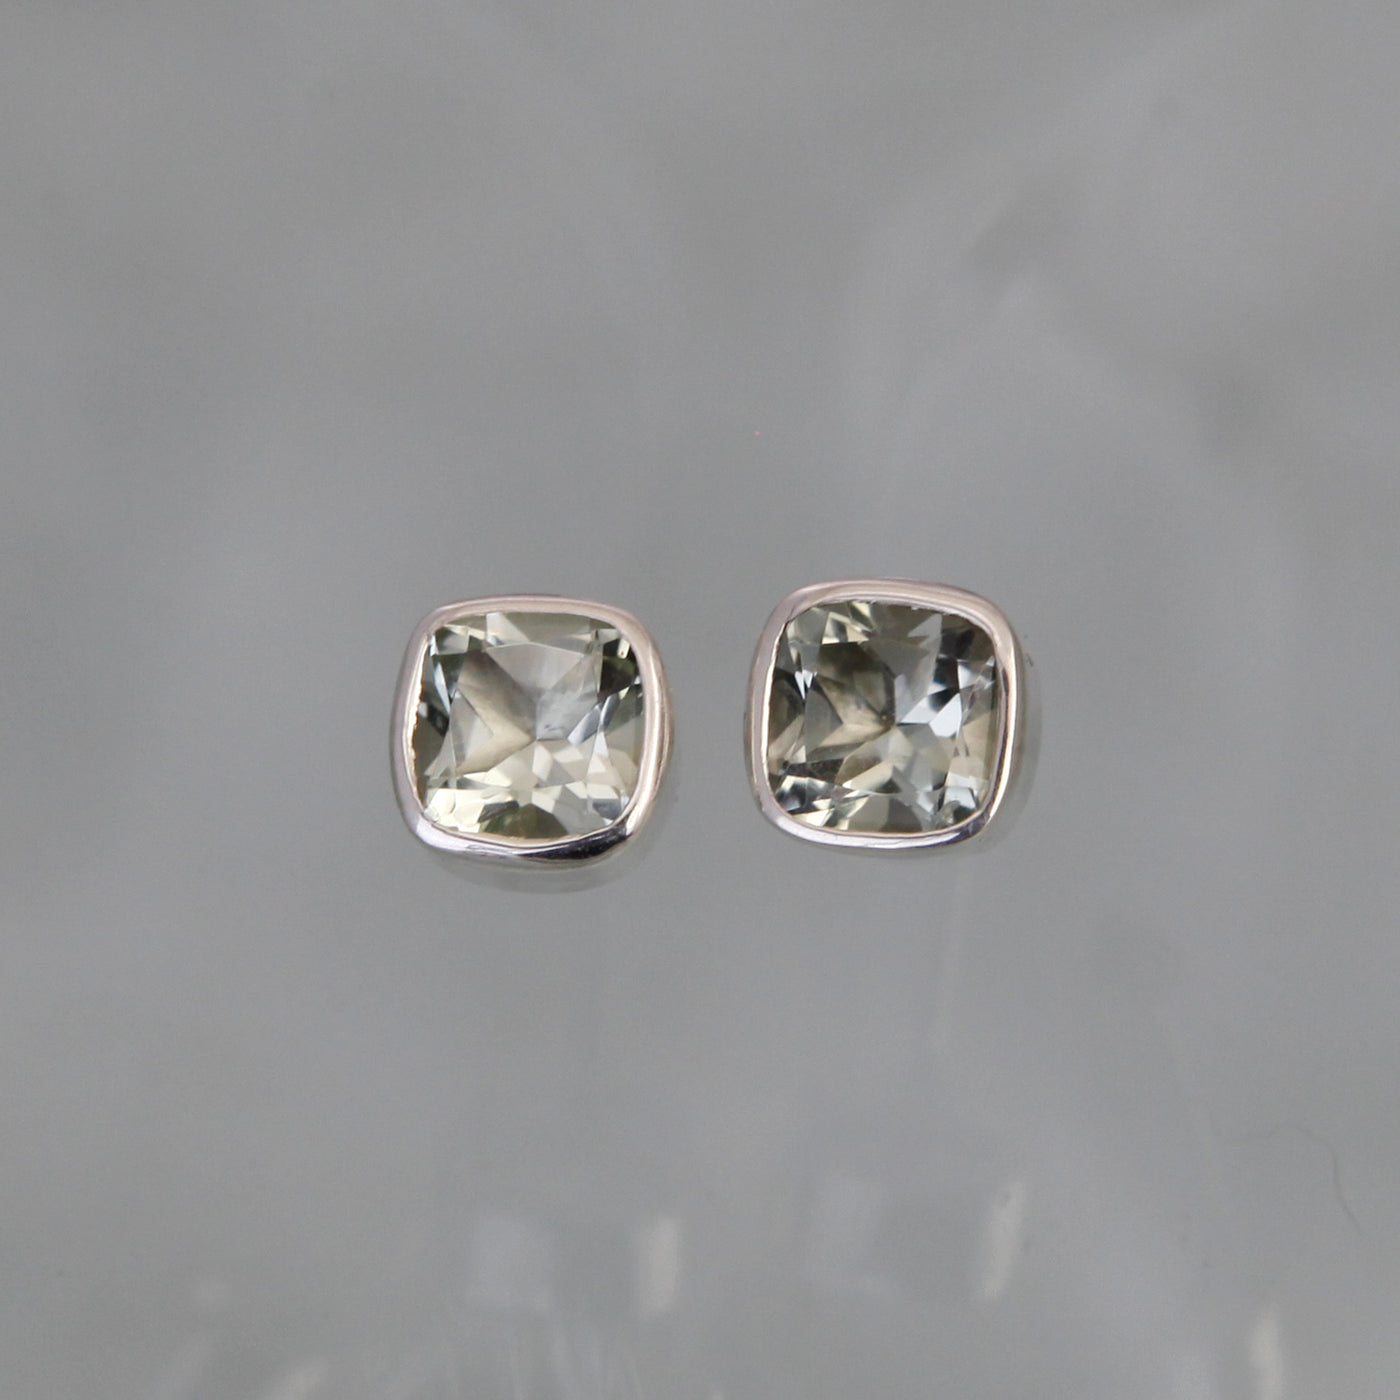 Image of White Topaz and Silver Gem Squared Stud Earrings